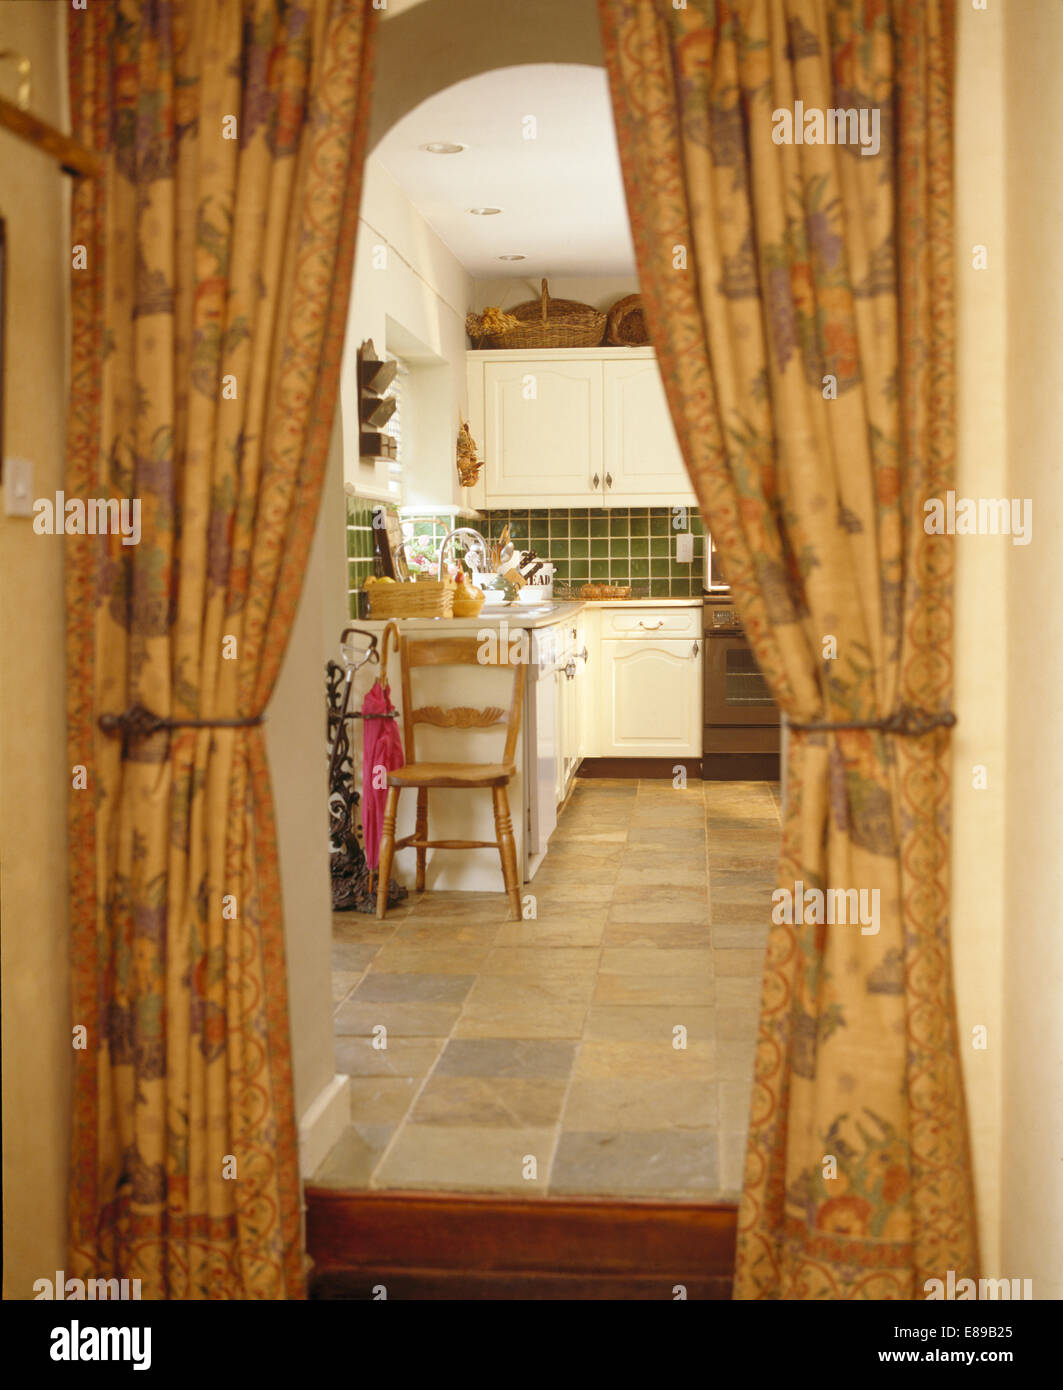 Patterned Curtains On Doorway To Dated Country Kitchen With Vinyl Stock Photo Alamy